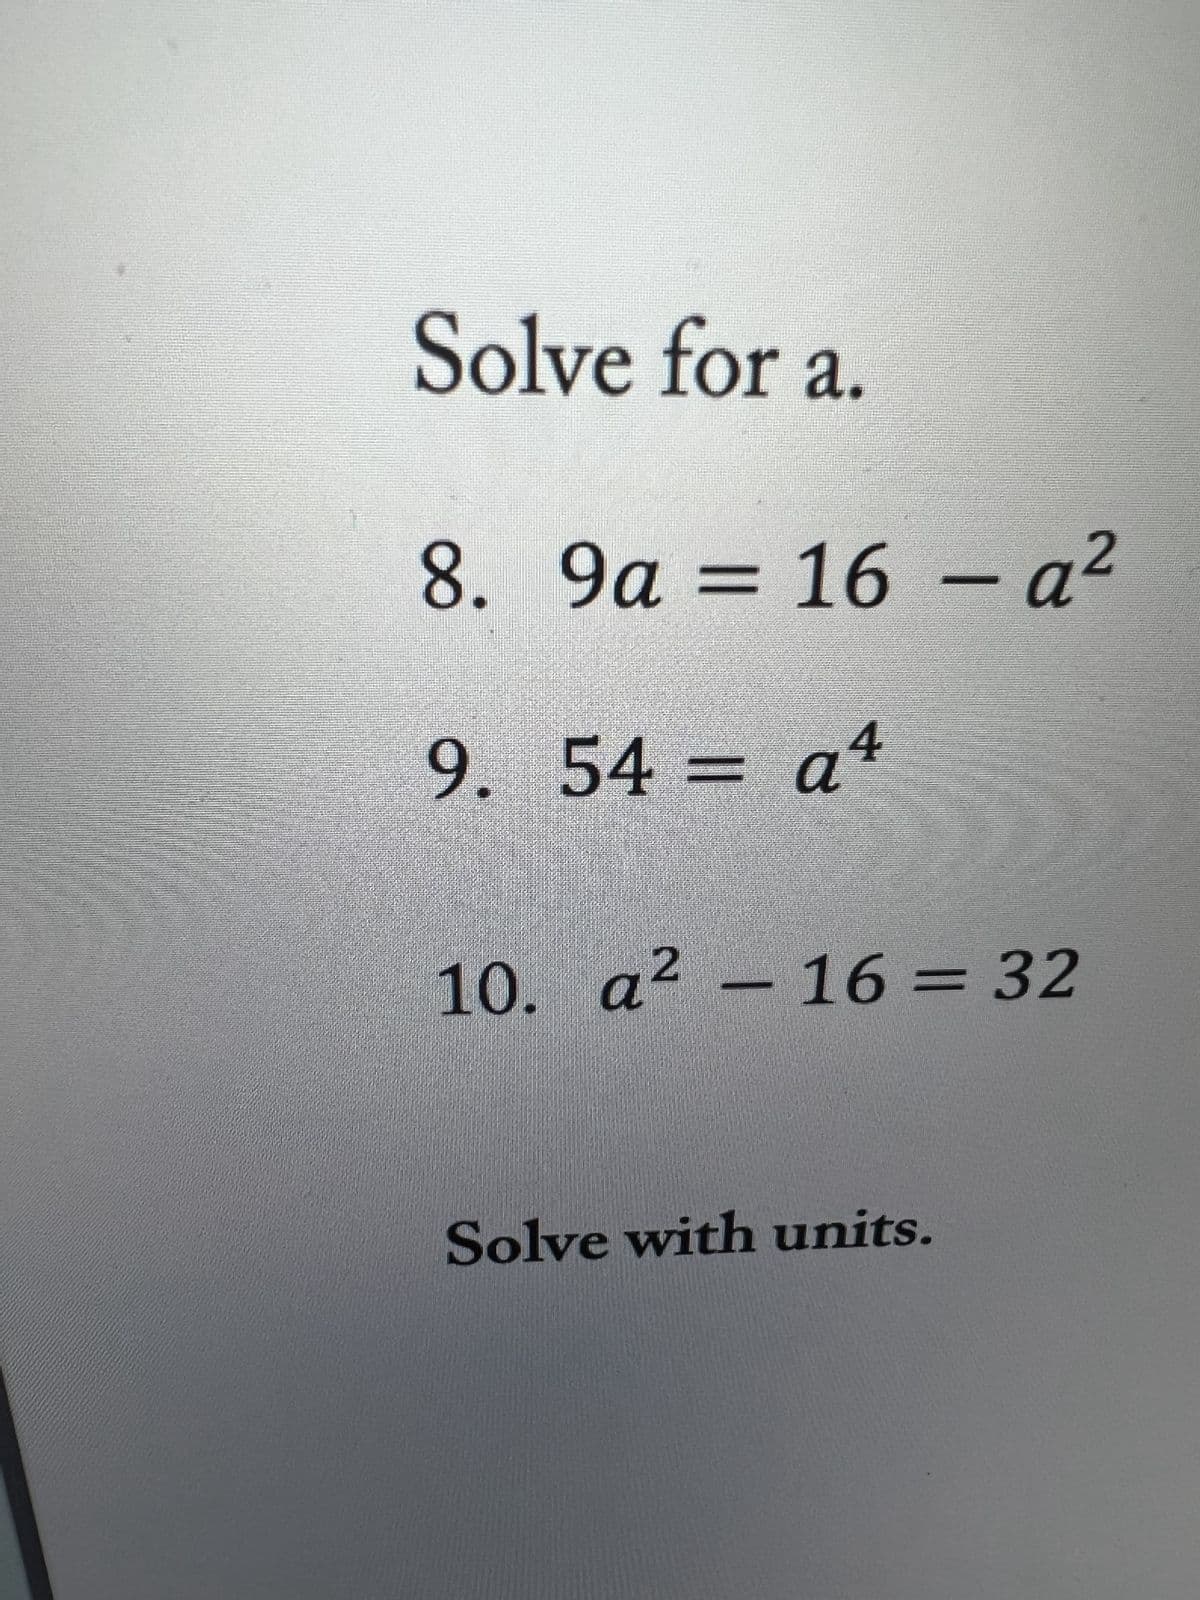 *
Solve for a.
2
8. 9a = 16 - a²
9. 54 a4
22
10. a² - 16 = 32
N
Solve with units.